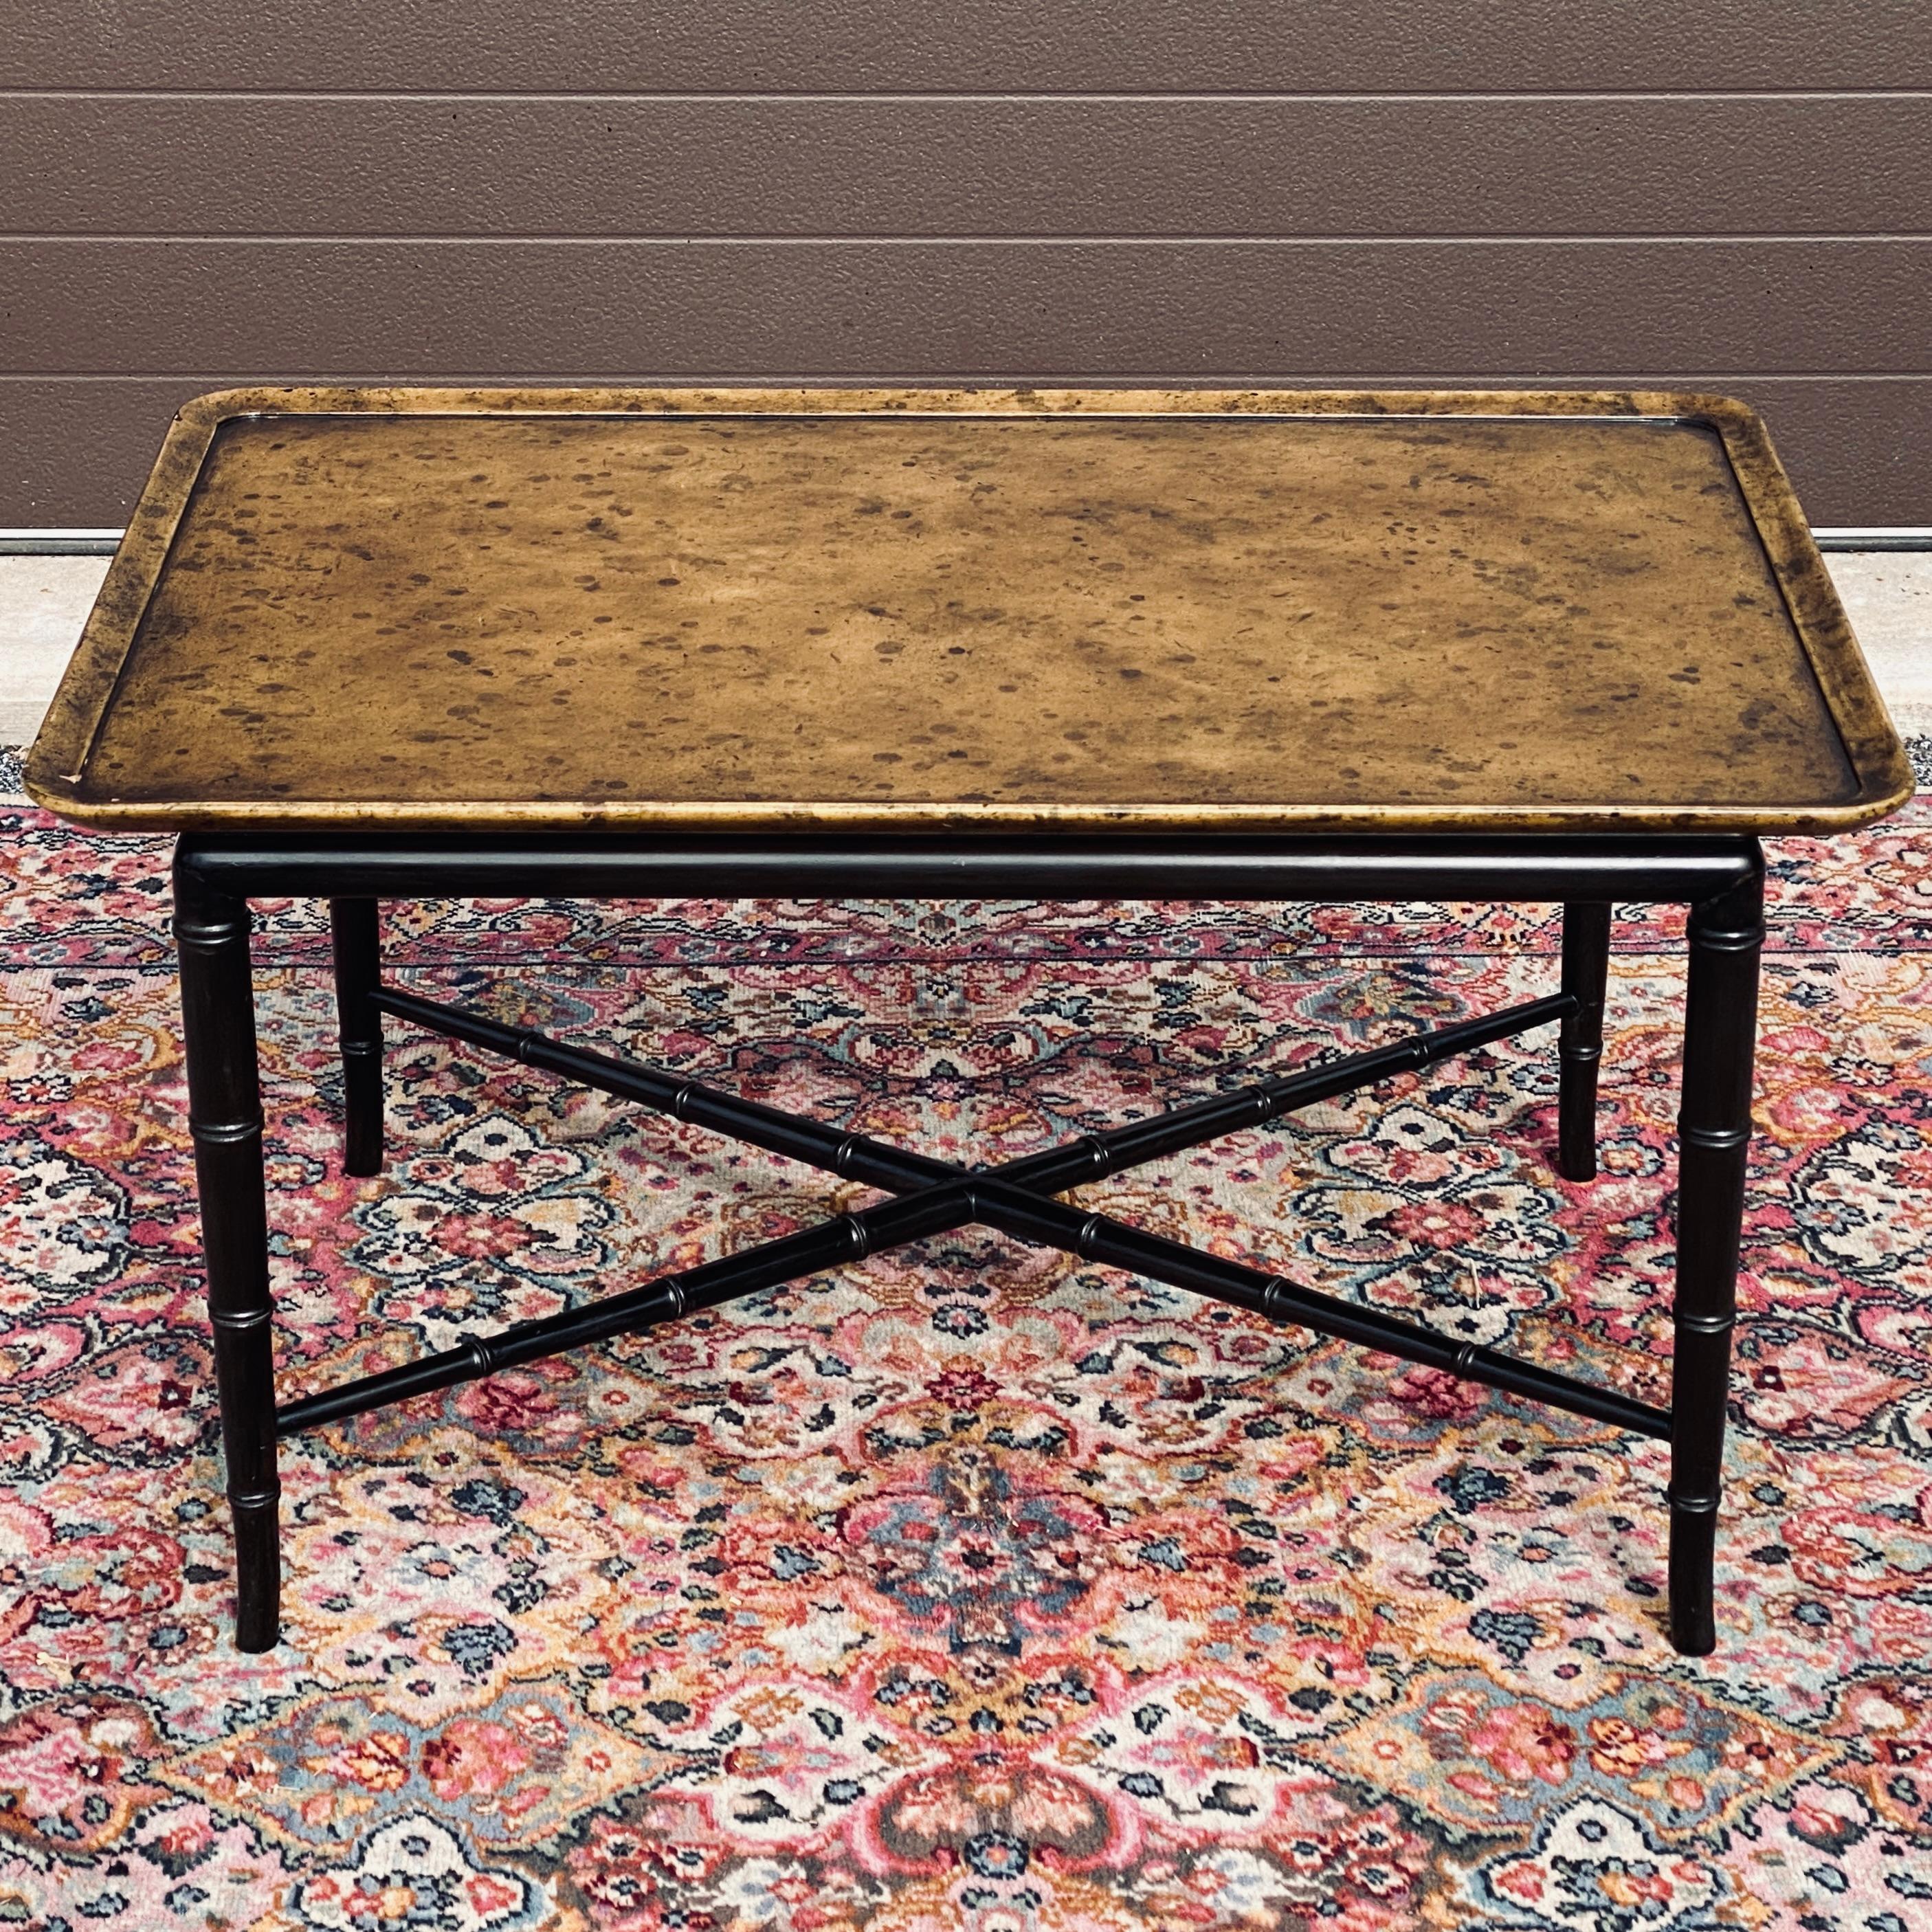 This elegant cocktail table dates to the 1950's and was manufactured by Kittinger Furniture of Buffalo, New York. The tray style top has the original faux tortoiseshell lacquered finish and is attached to an ebonized faux bamboo base of four tapered